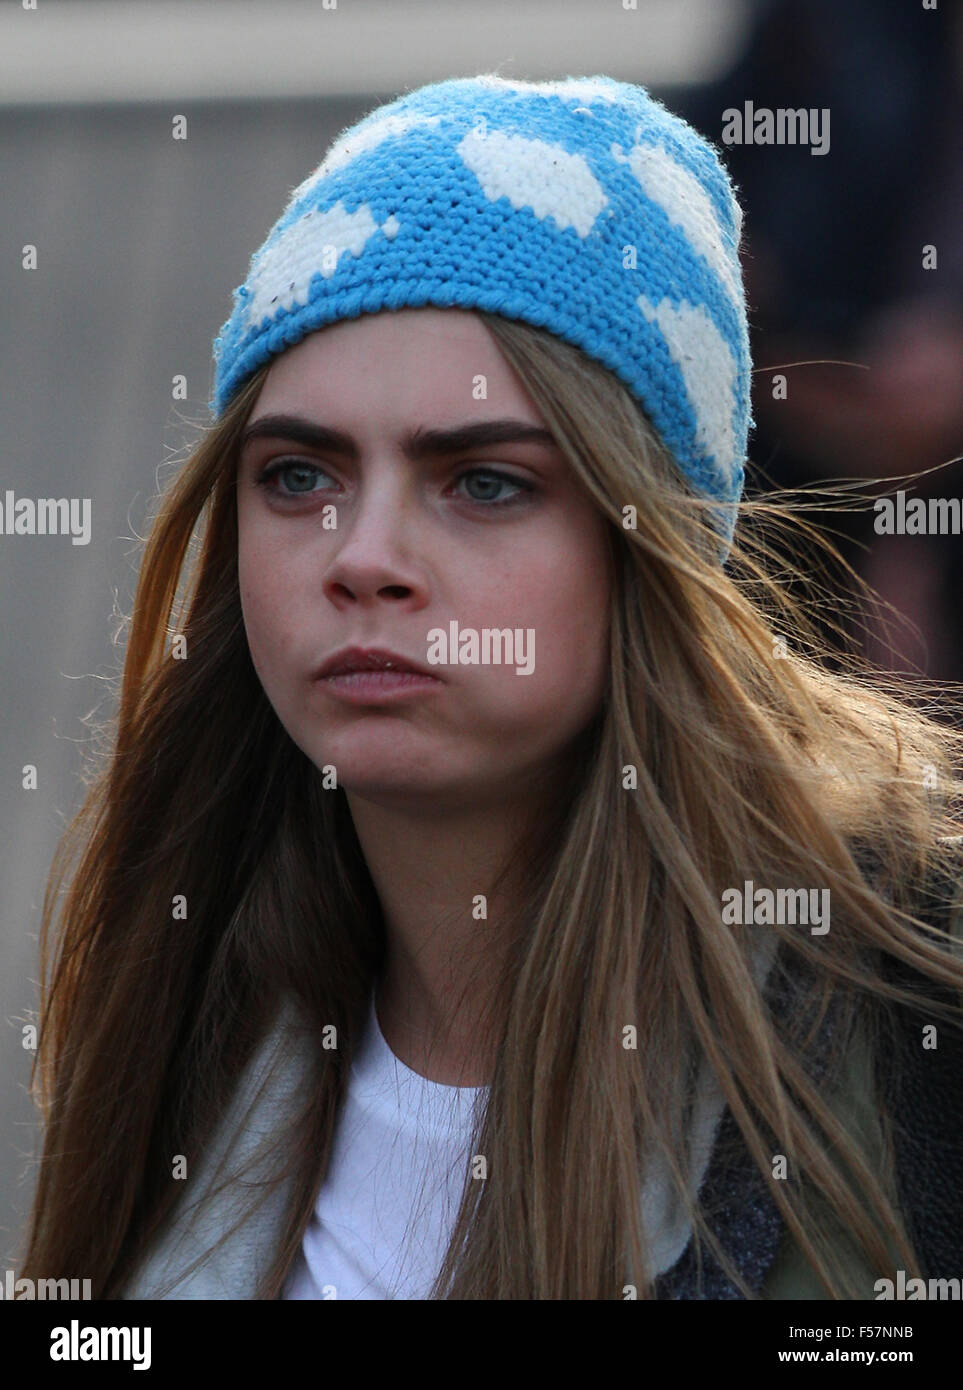 London, UK, 18th February 2013: Cara Delevingne arrives for the Burberry  Prorsum - London Fashion Week show Stock Photo - Alamy